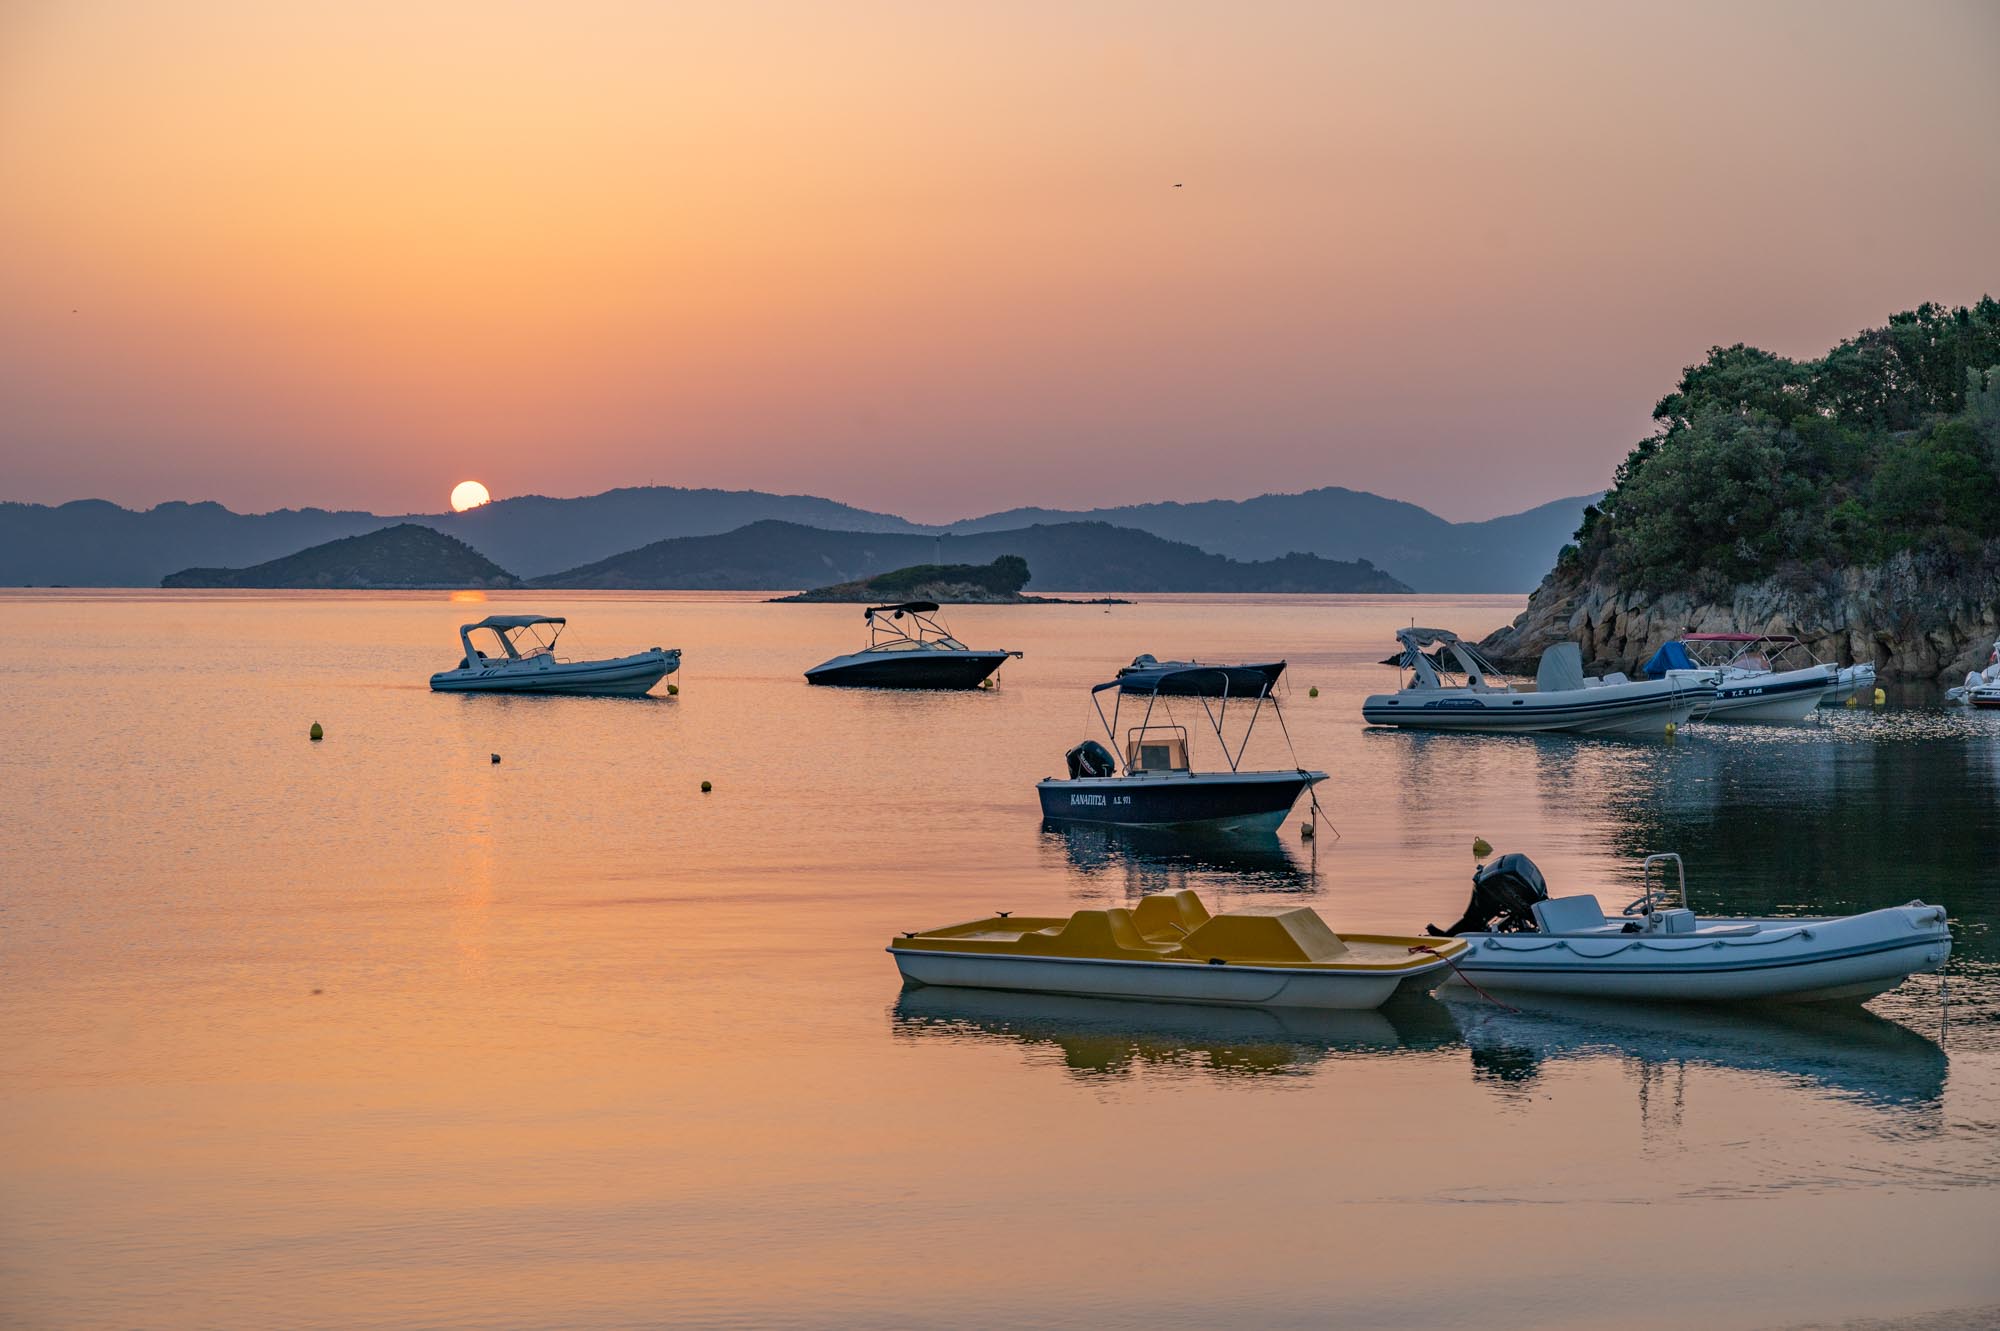 sunrise in Skiathos with boats in the foreground